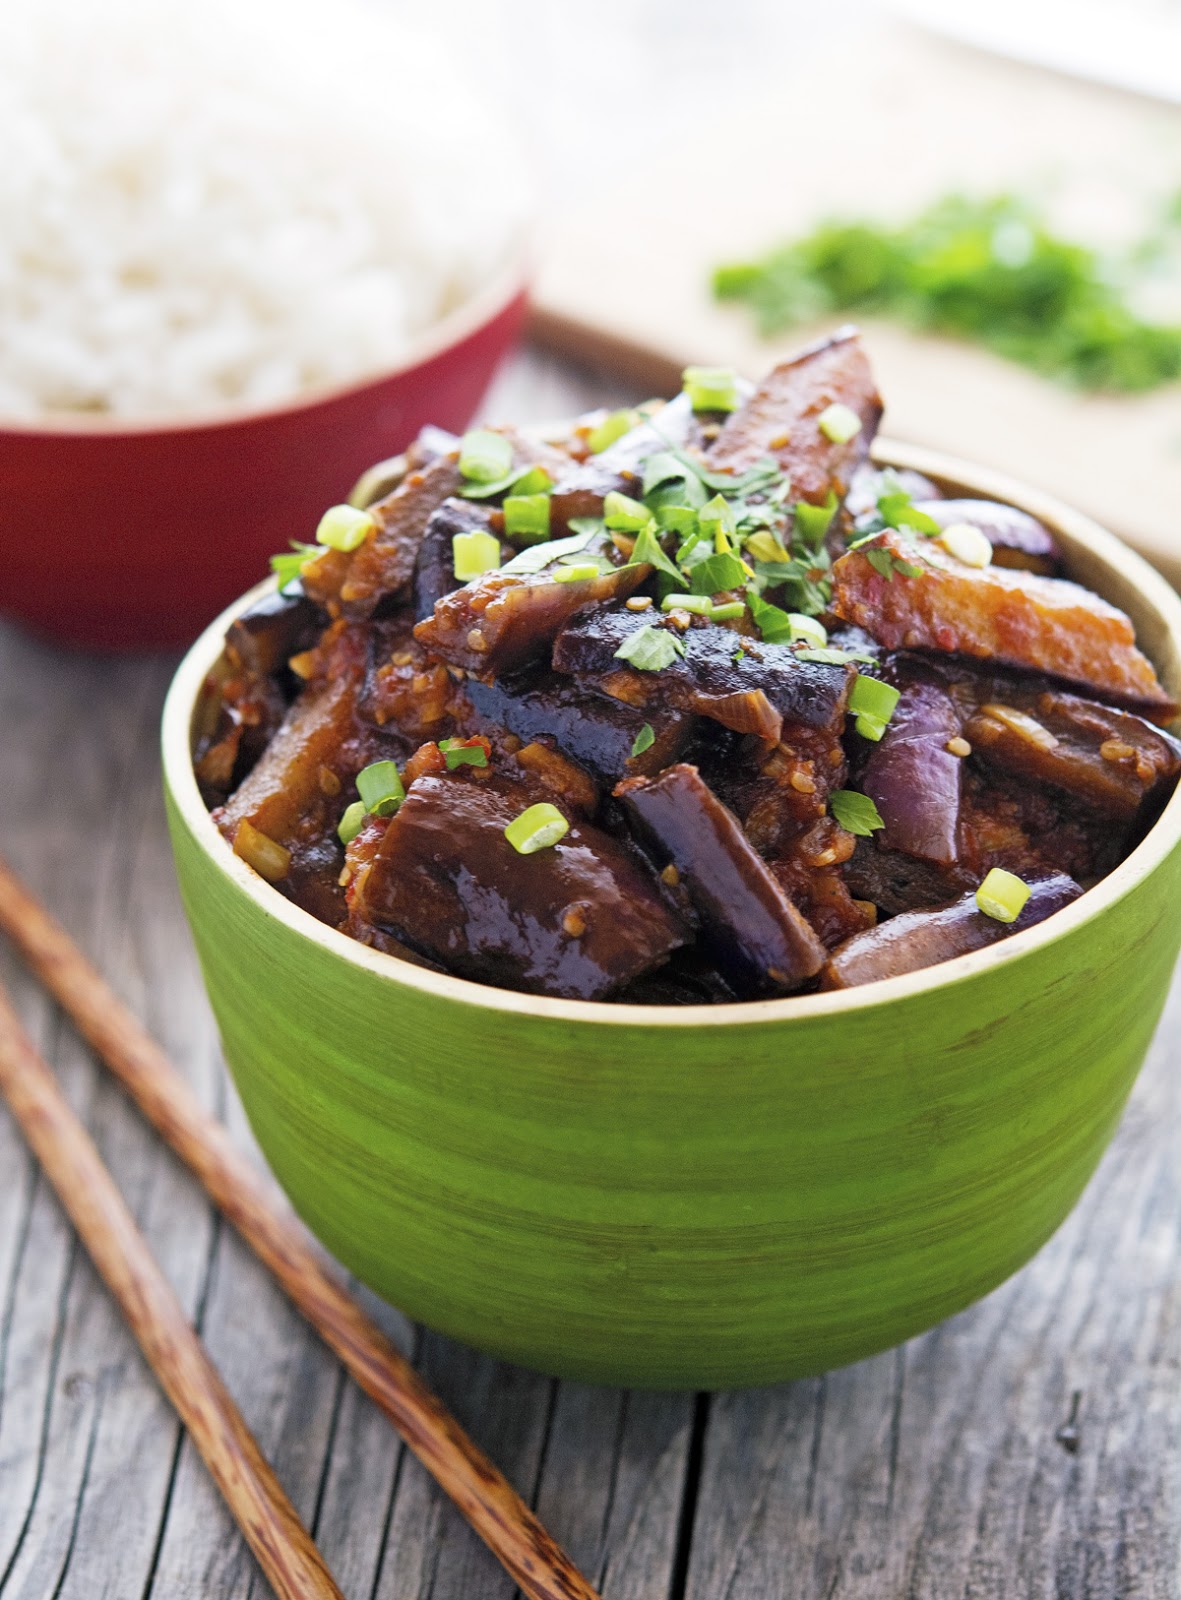 The Iron You: Spicy Vegan Chinese Eggplant